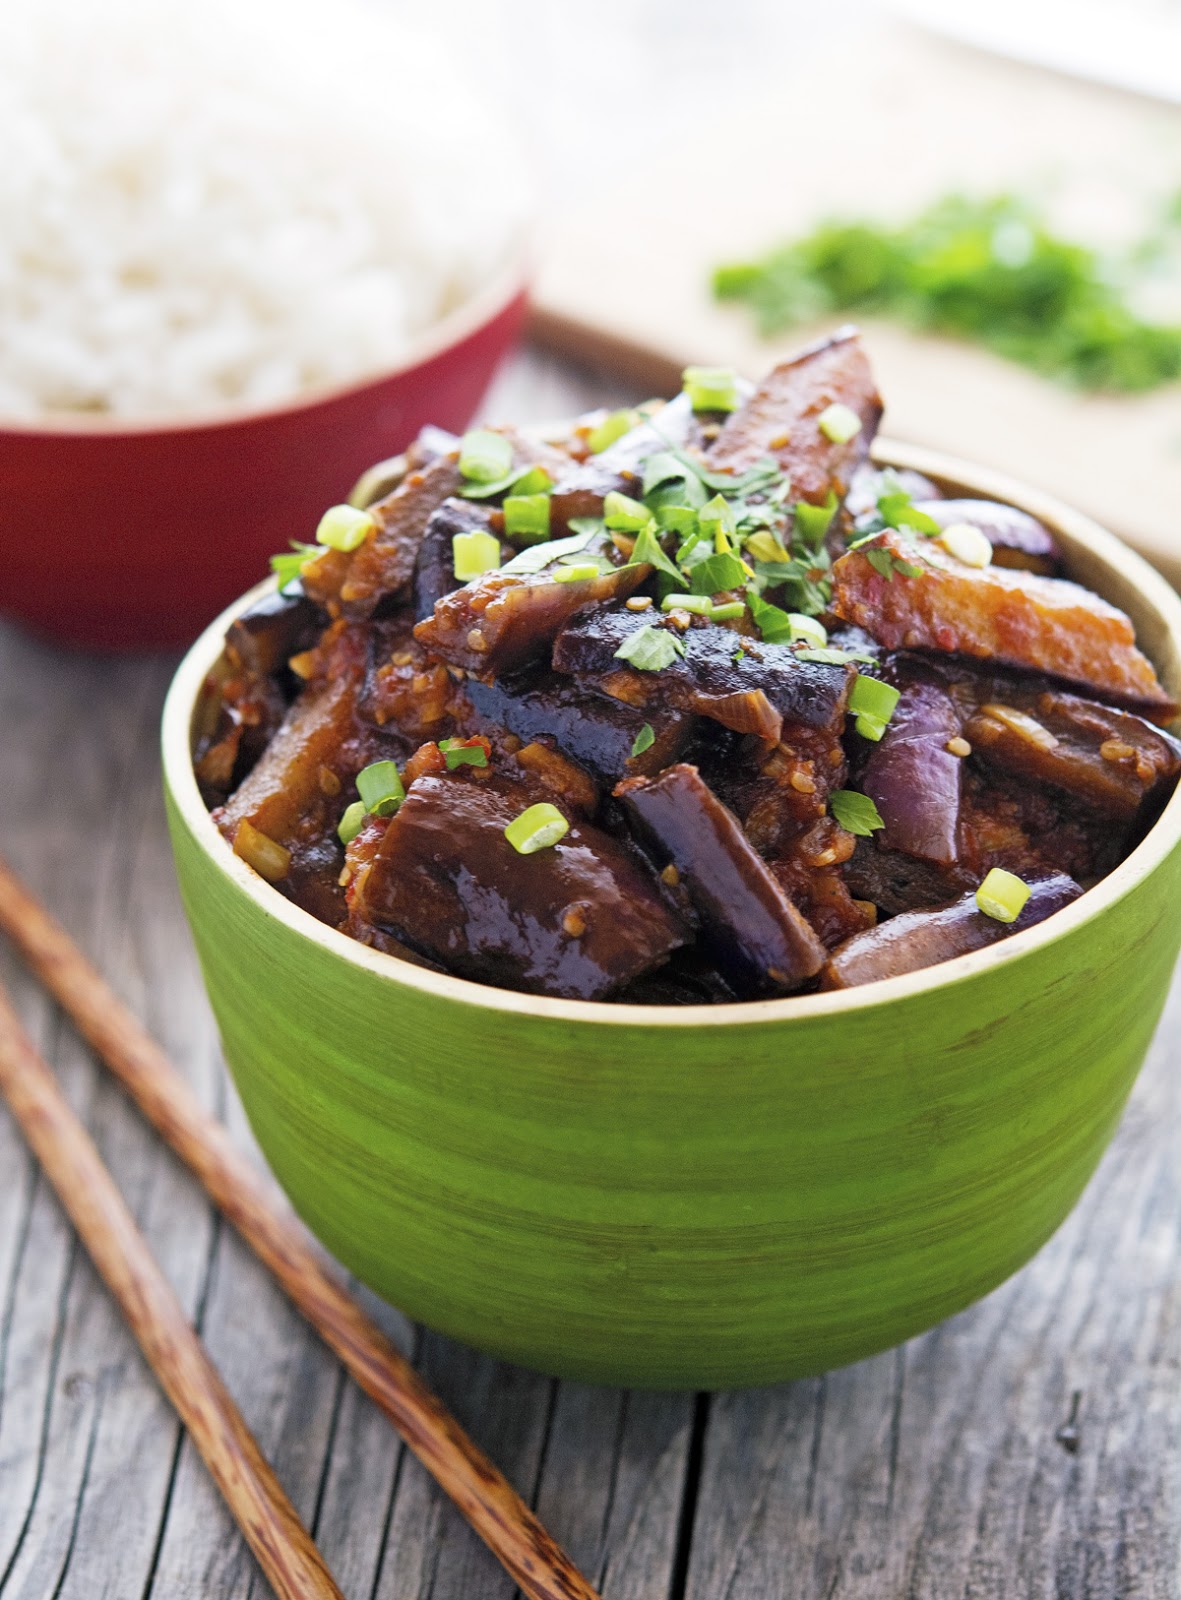 The Iron You: Spicy Vegan Chinese Eggplant